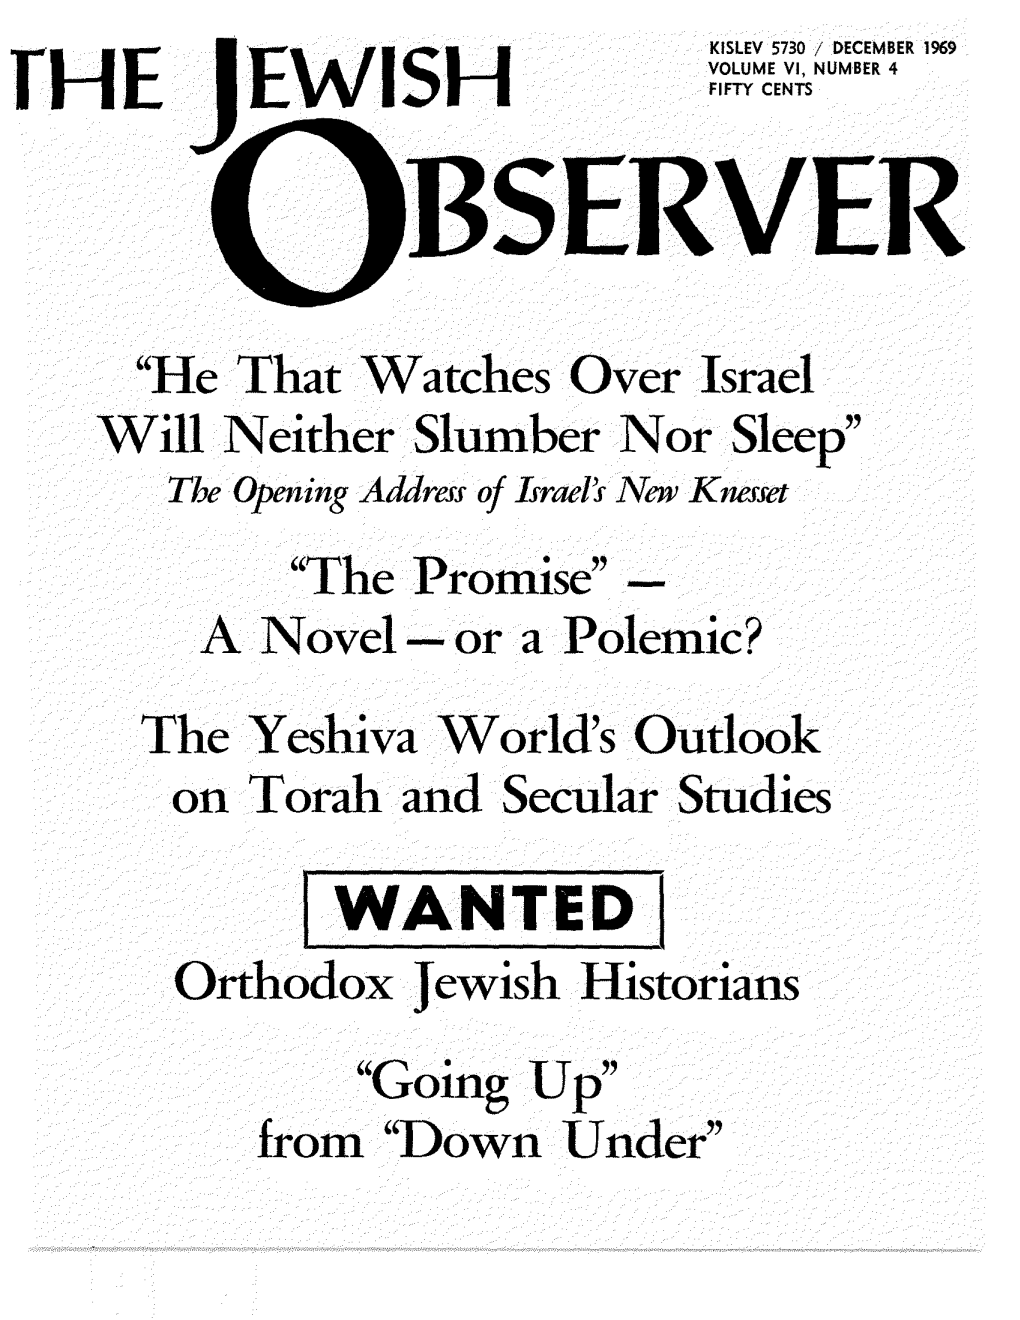 I WANTED I Orthodox Jewish Historians "Going Up" from "Down Under" the JEWISH QBSERVER